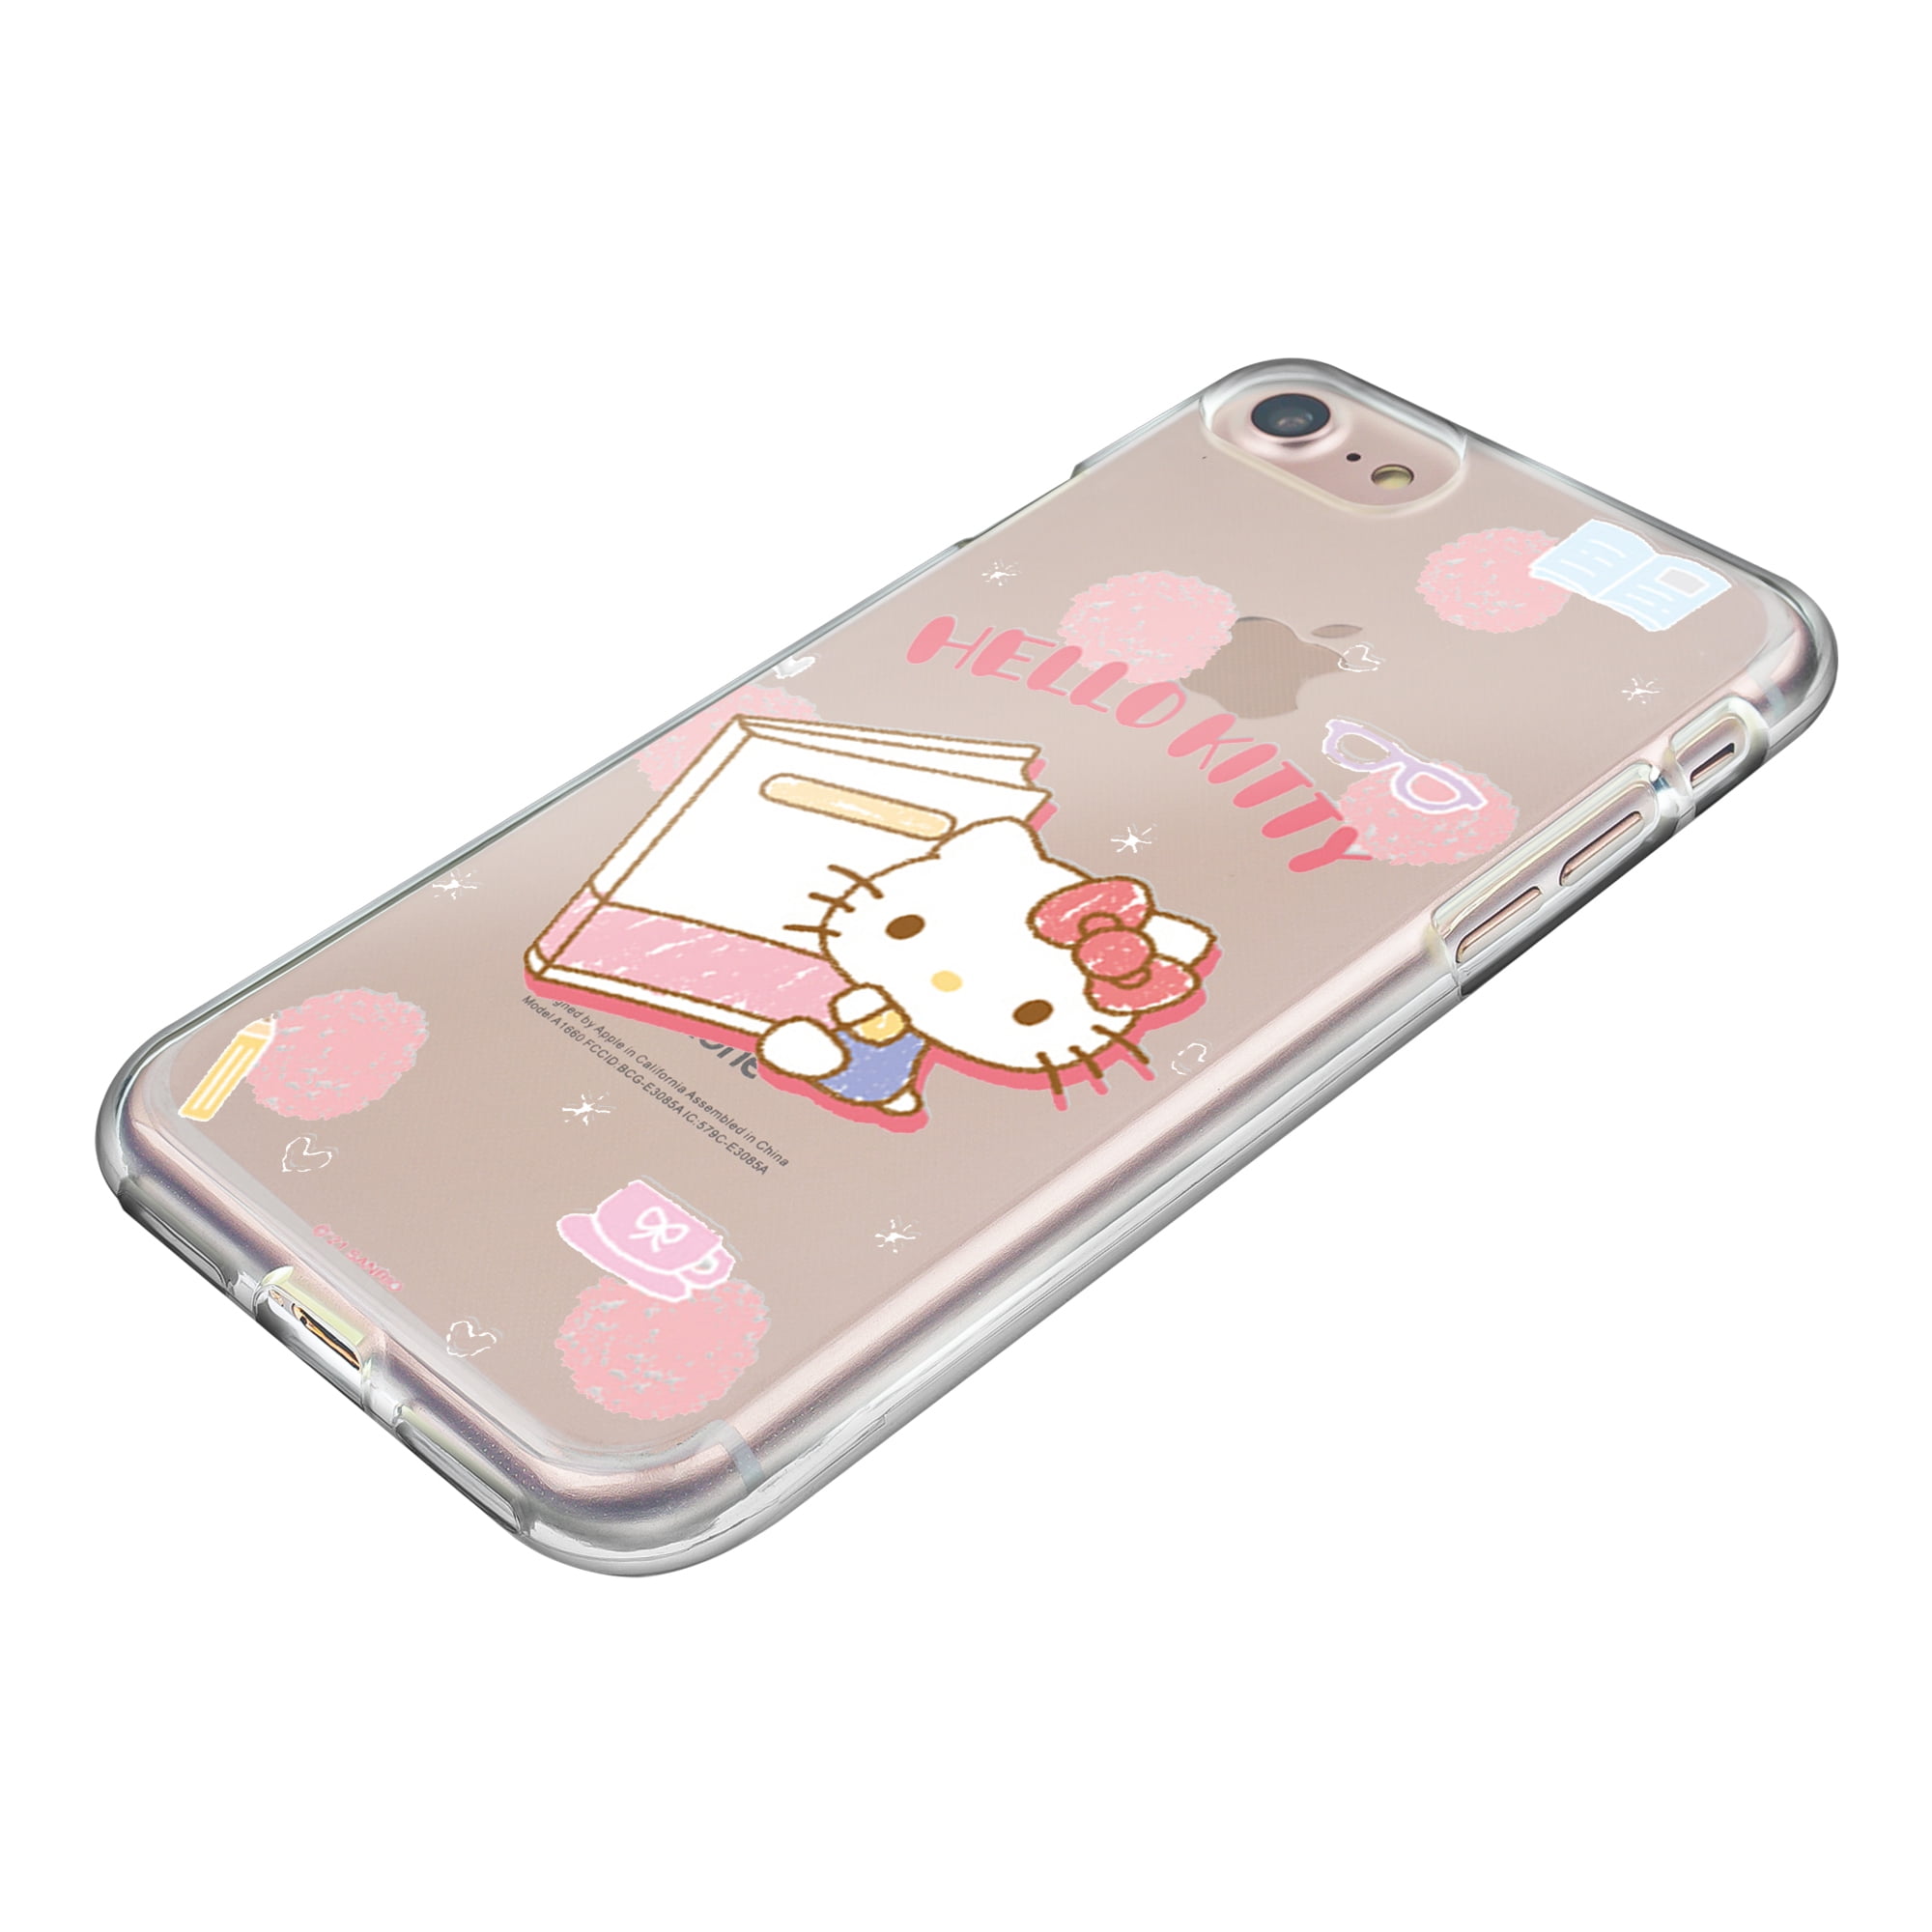 Plus iPhone - 7 Cute Ice Clear Cinnamoroll Case / Plus Sanrio 8 Soft iPhone Cover Jelly